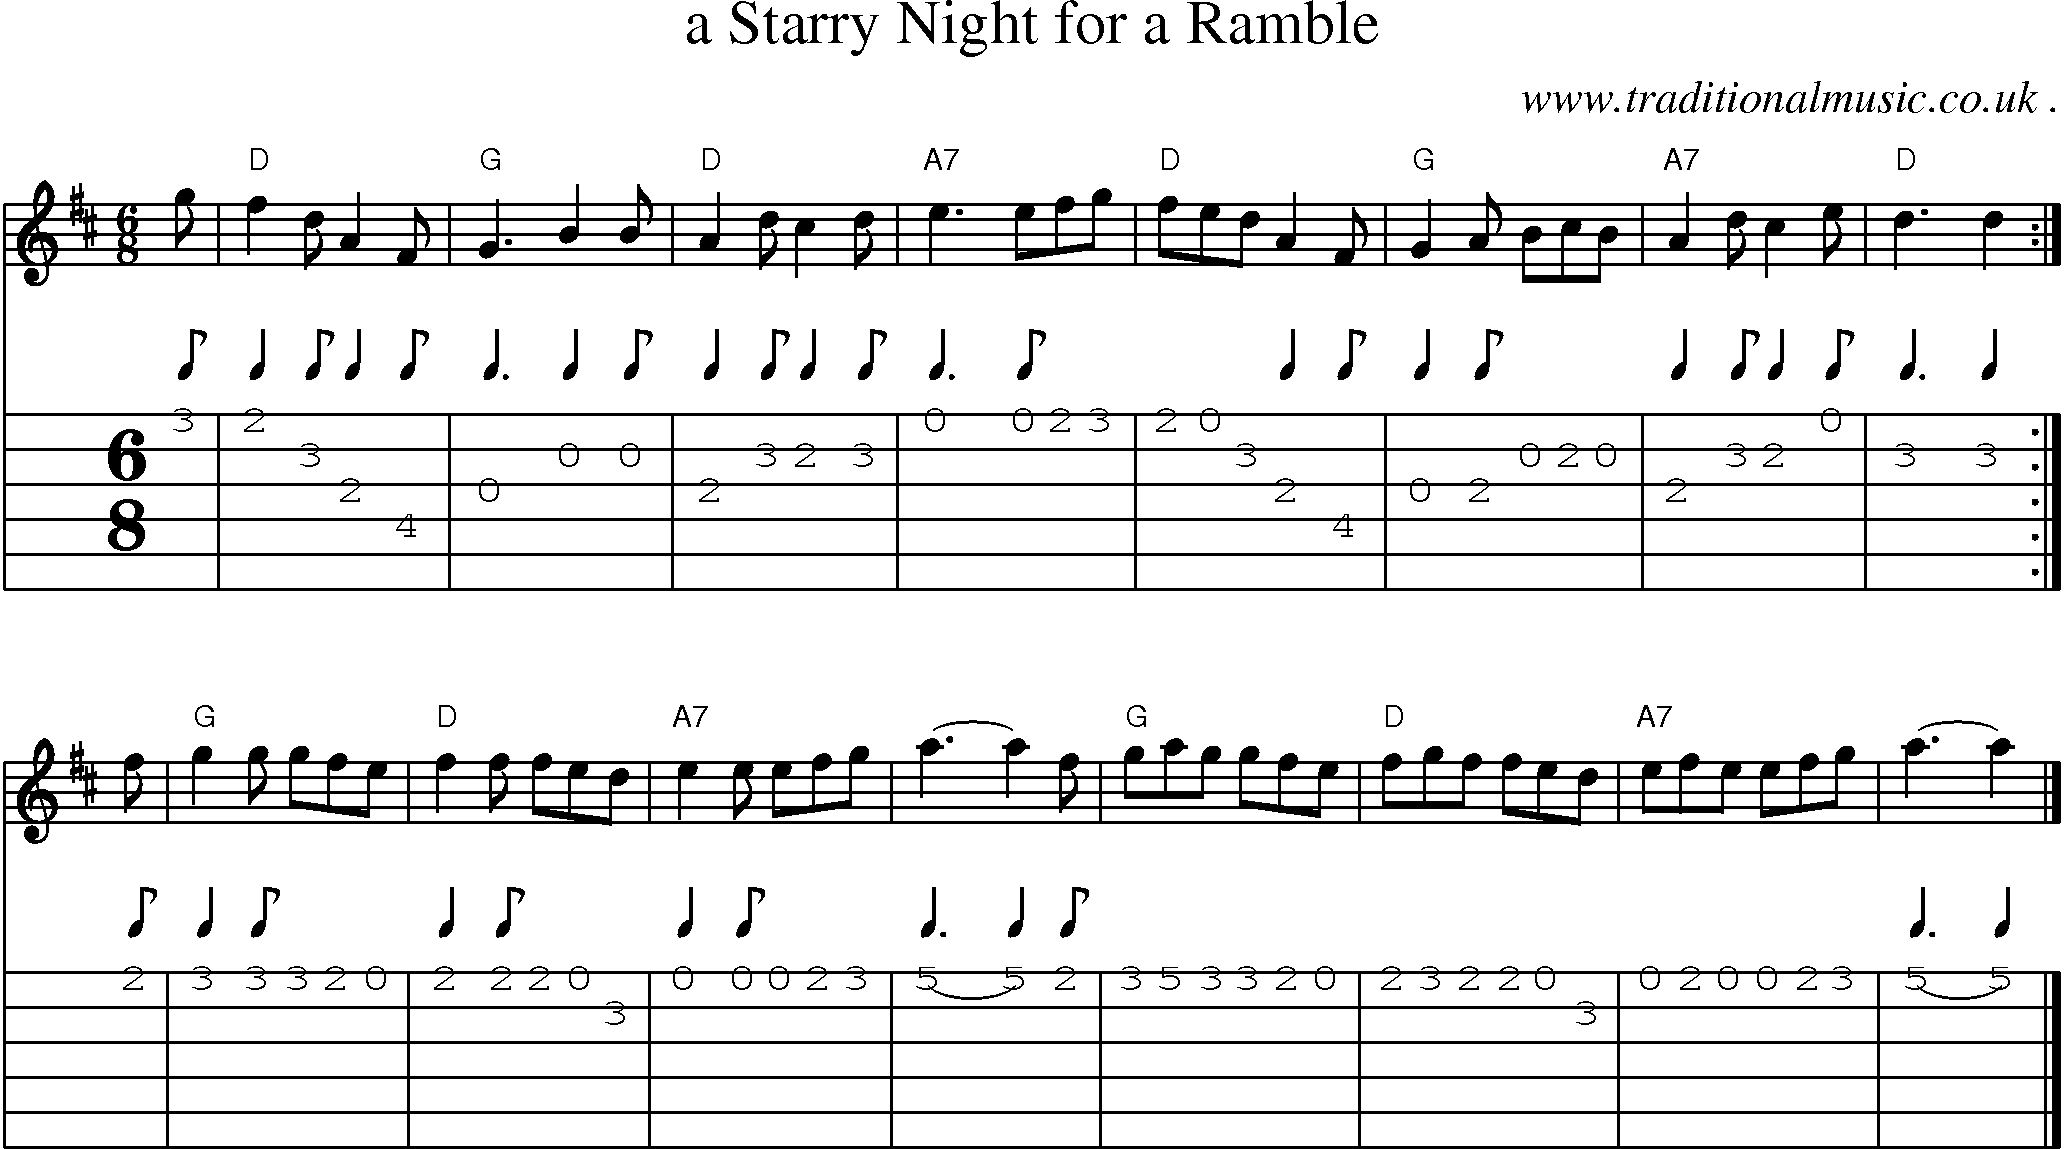 Sheet-music  score, Chords and Guitar Tabs for A Starry Night For A Ramble